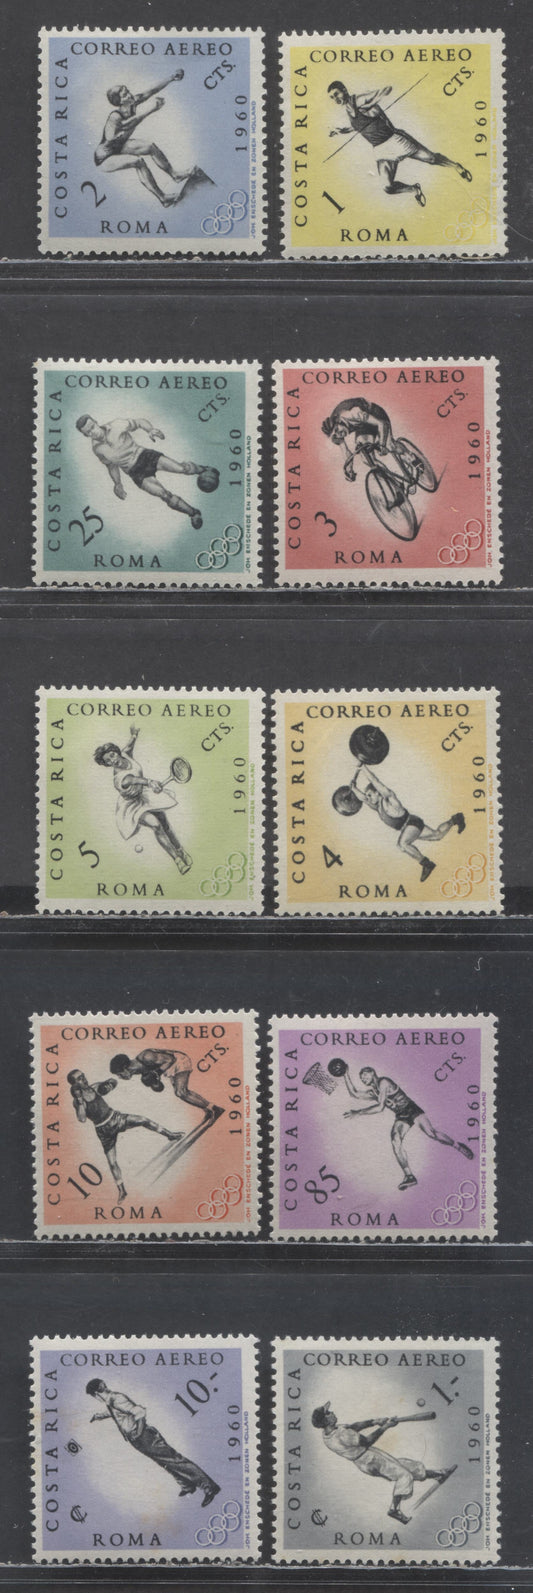 Lot 364 Costa Rica SC#C303-C312 1960 Olympic Games Airmail Issue, 10 VFOG Singles, Click on Listing to See ALL Pictures, Estimated Value $6